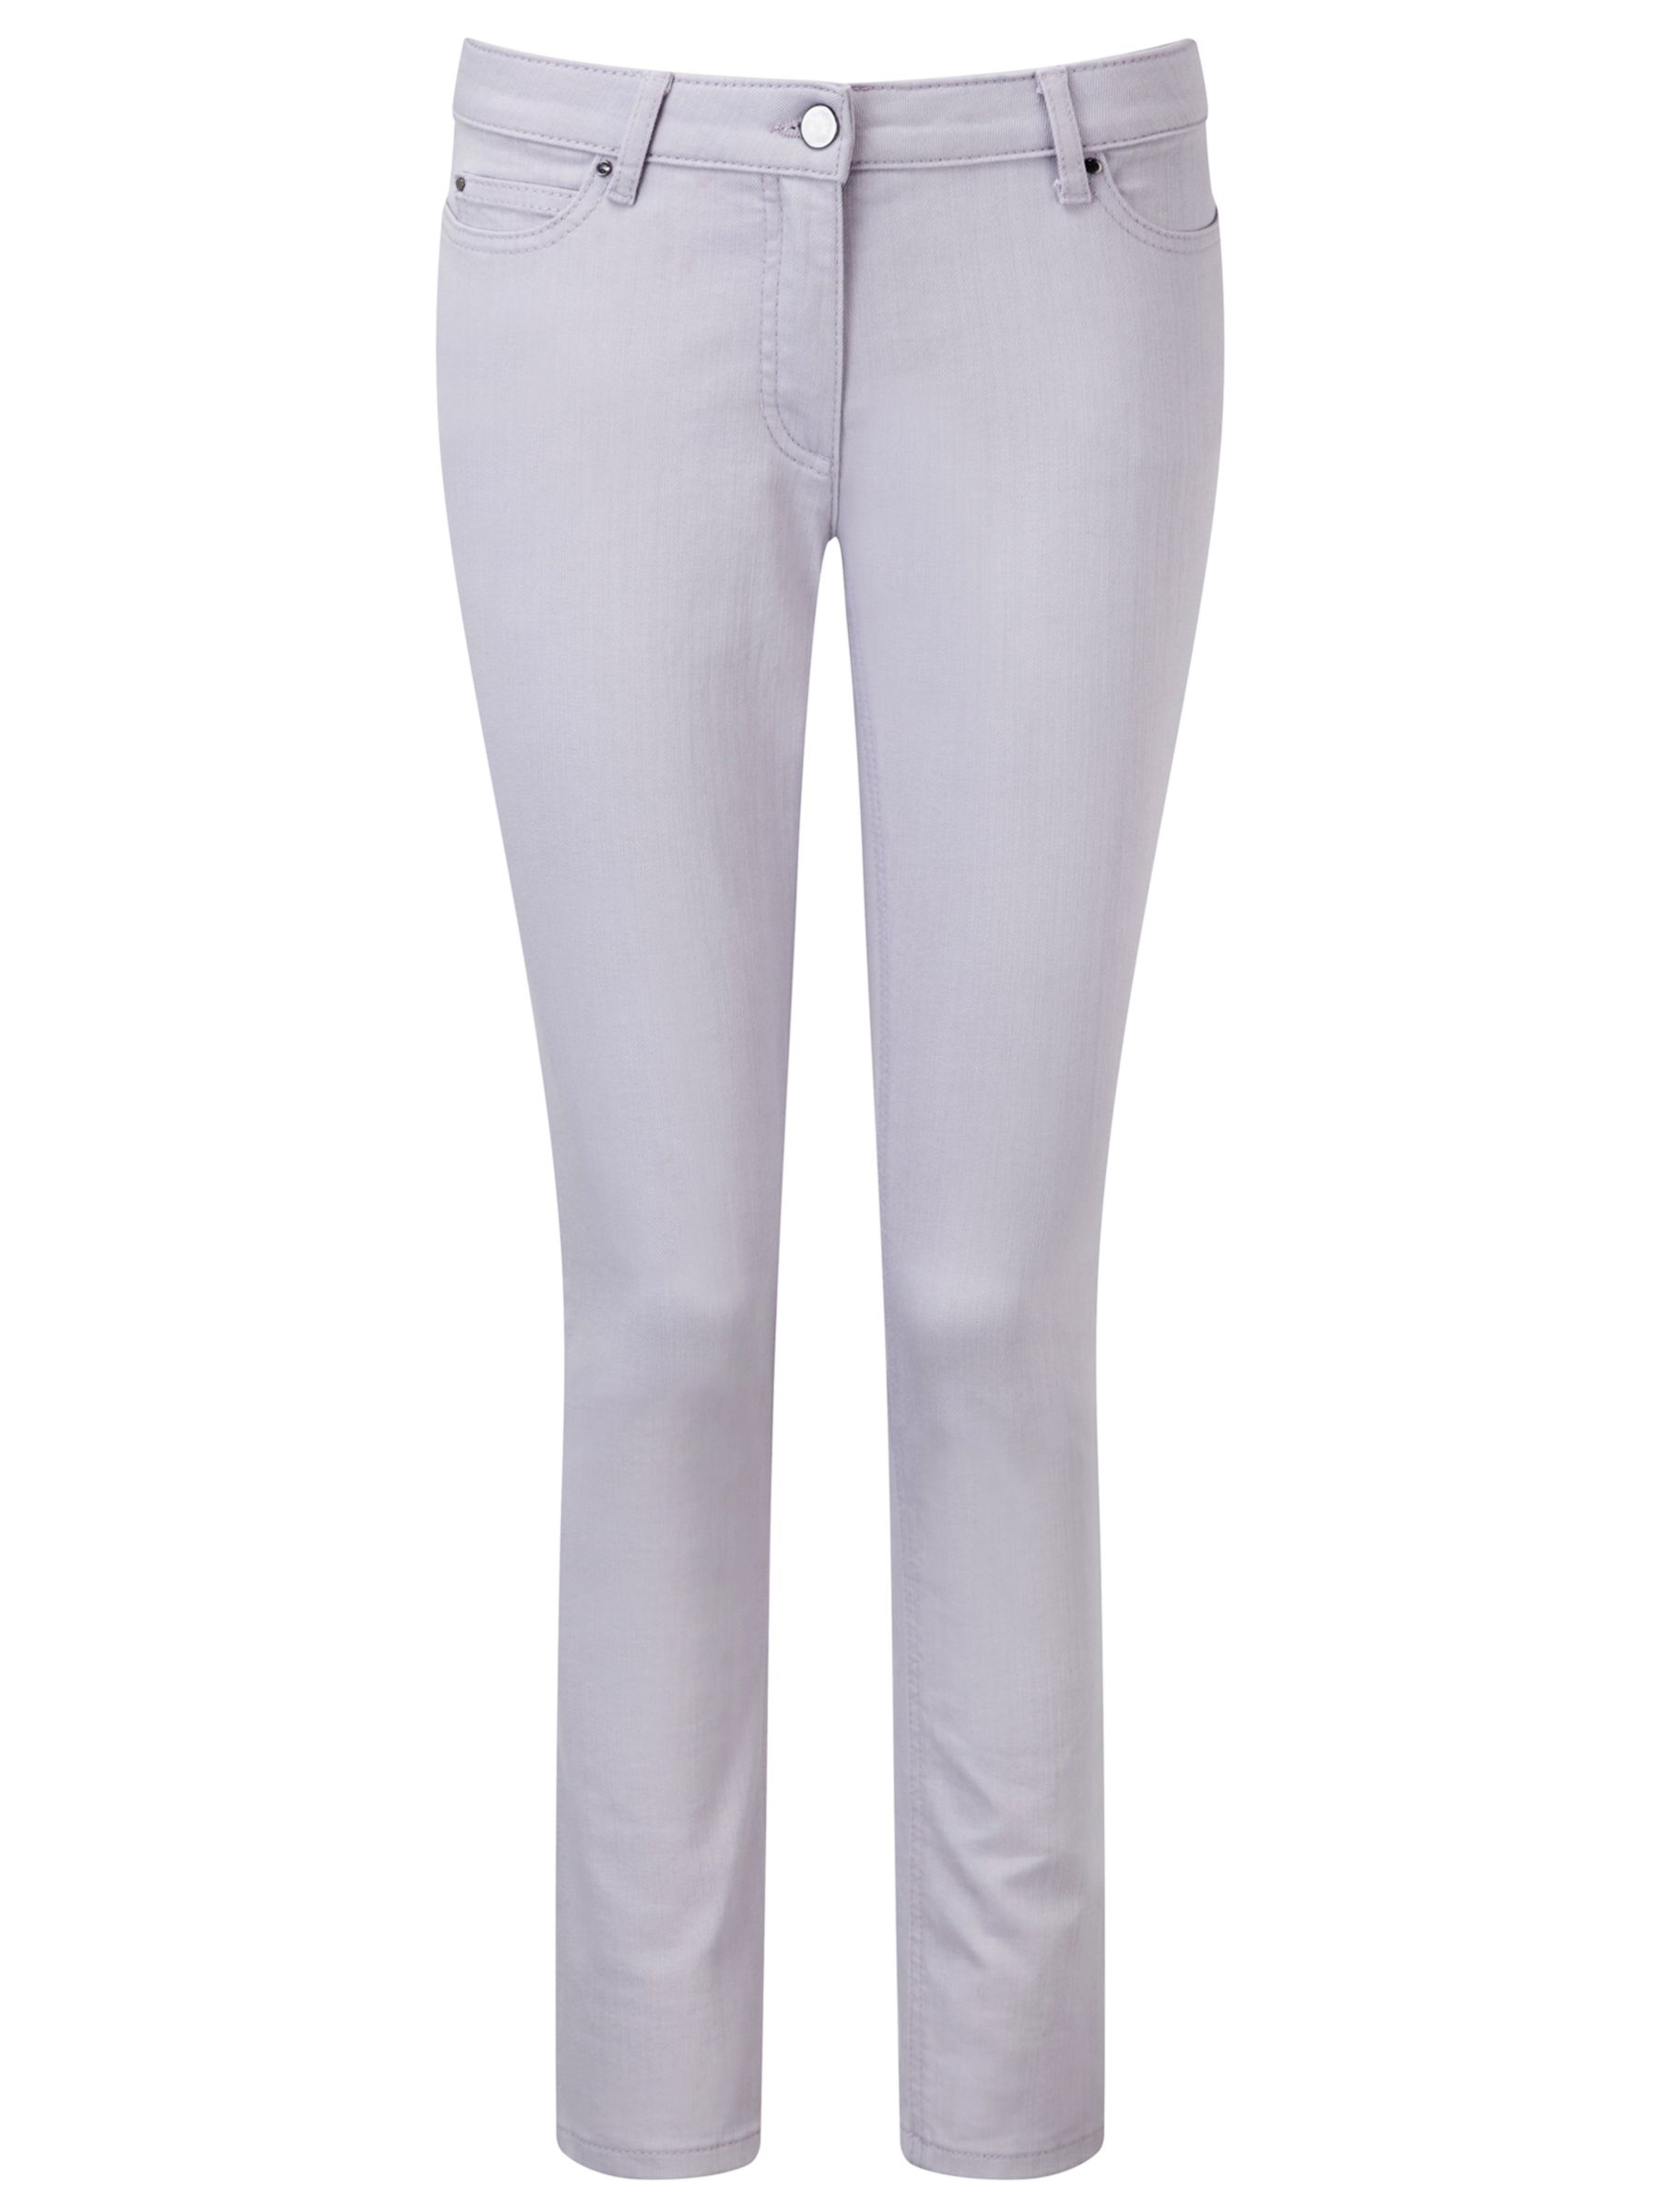 Pure Collection Zara Slim Leg Jeans, Lilac at John Lewis & Partners